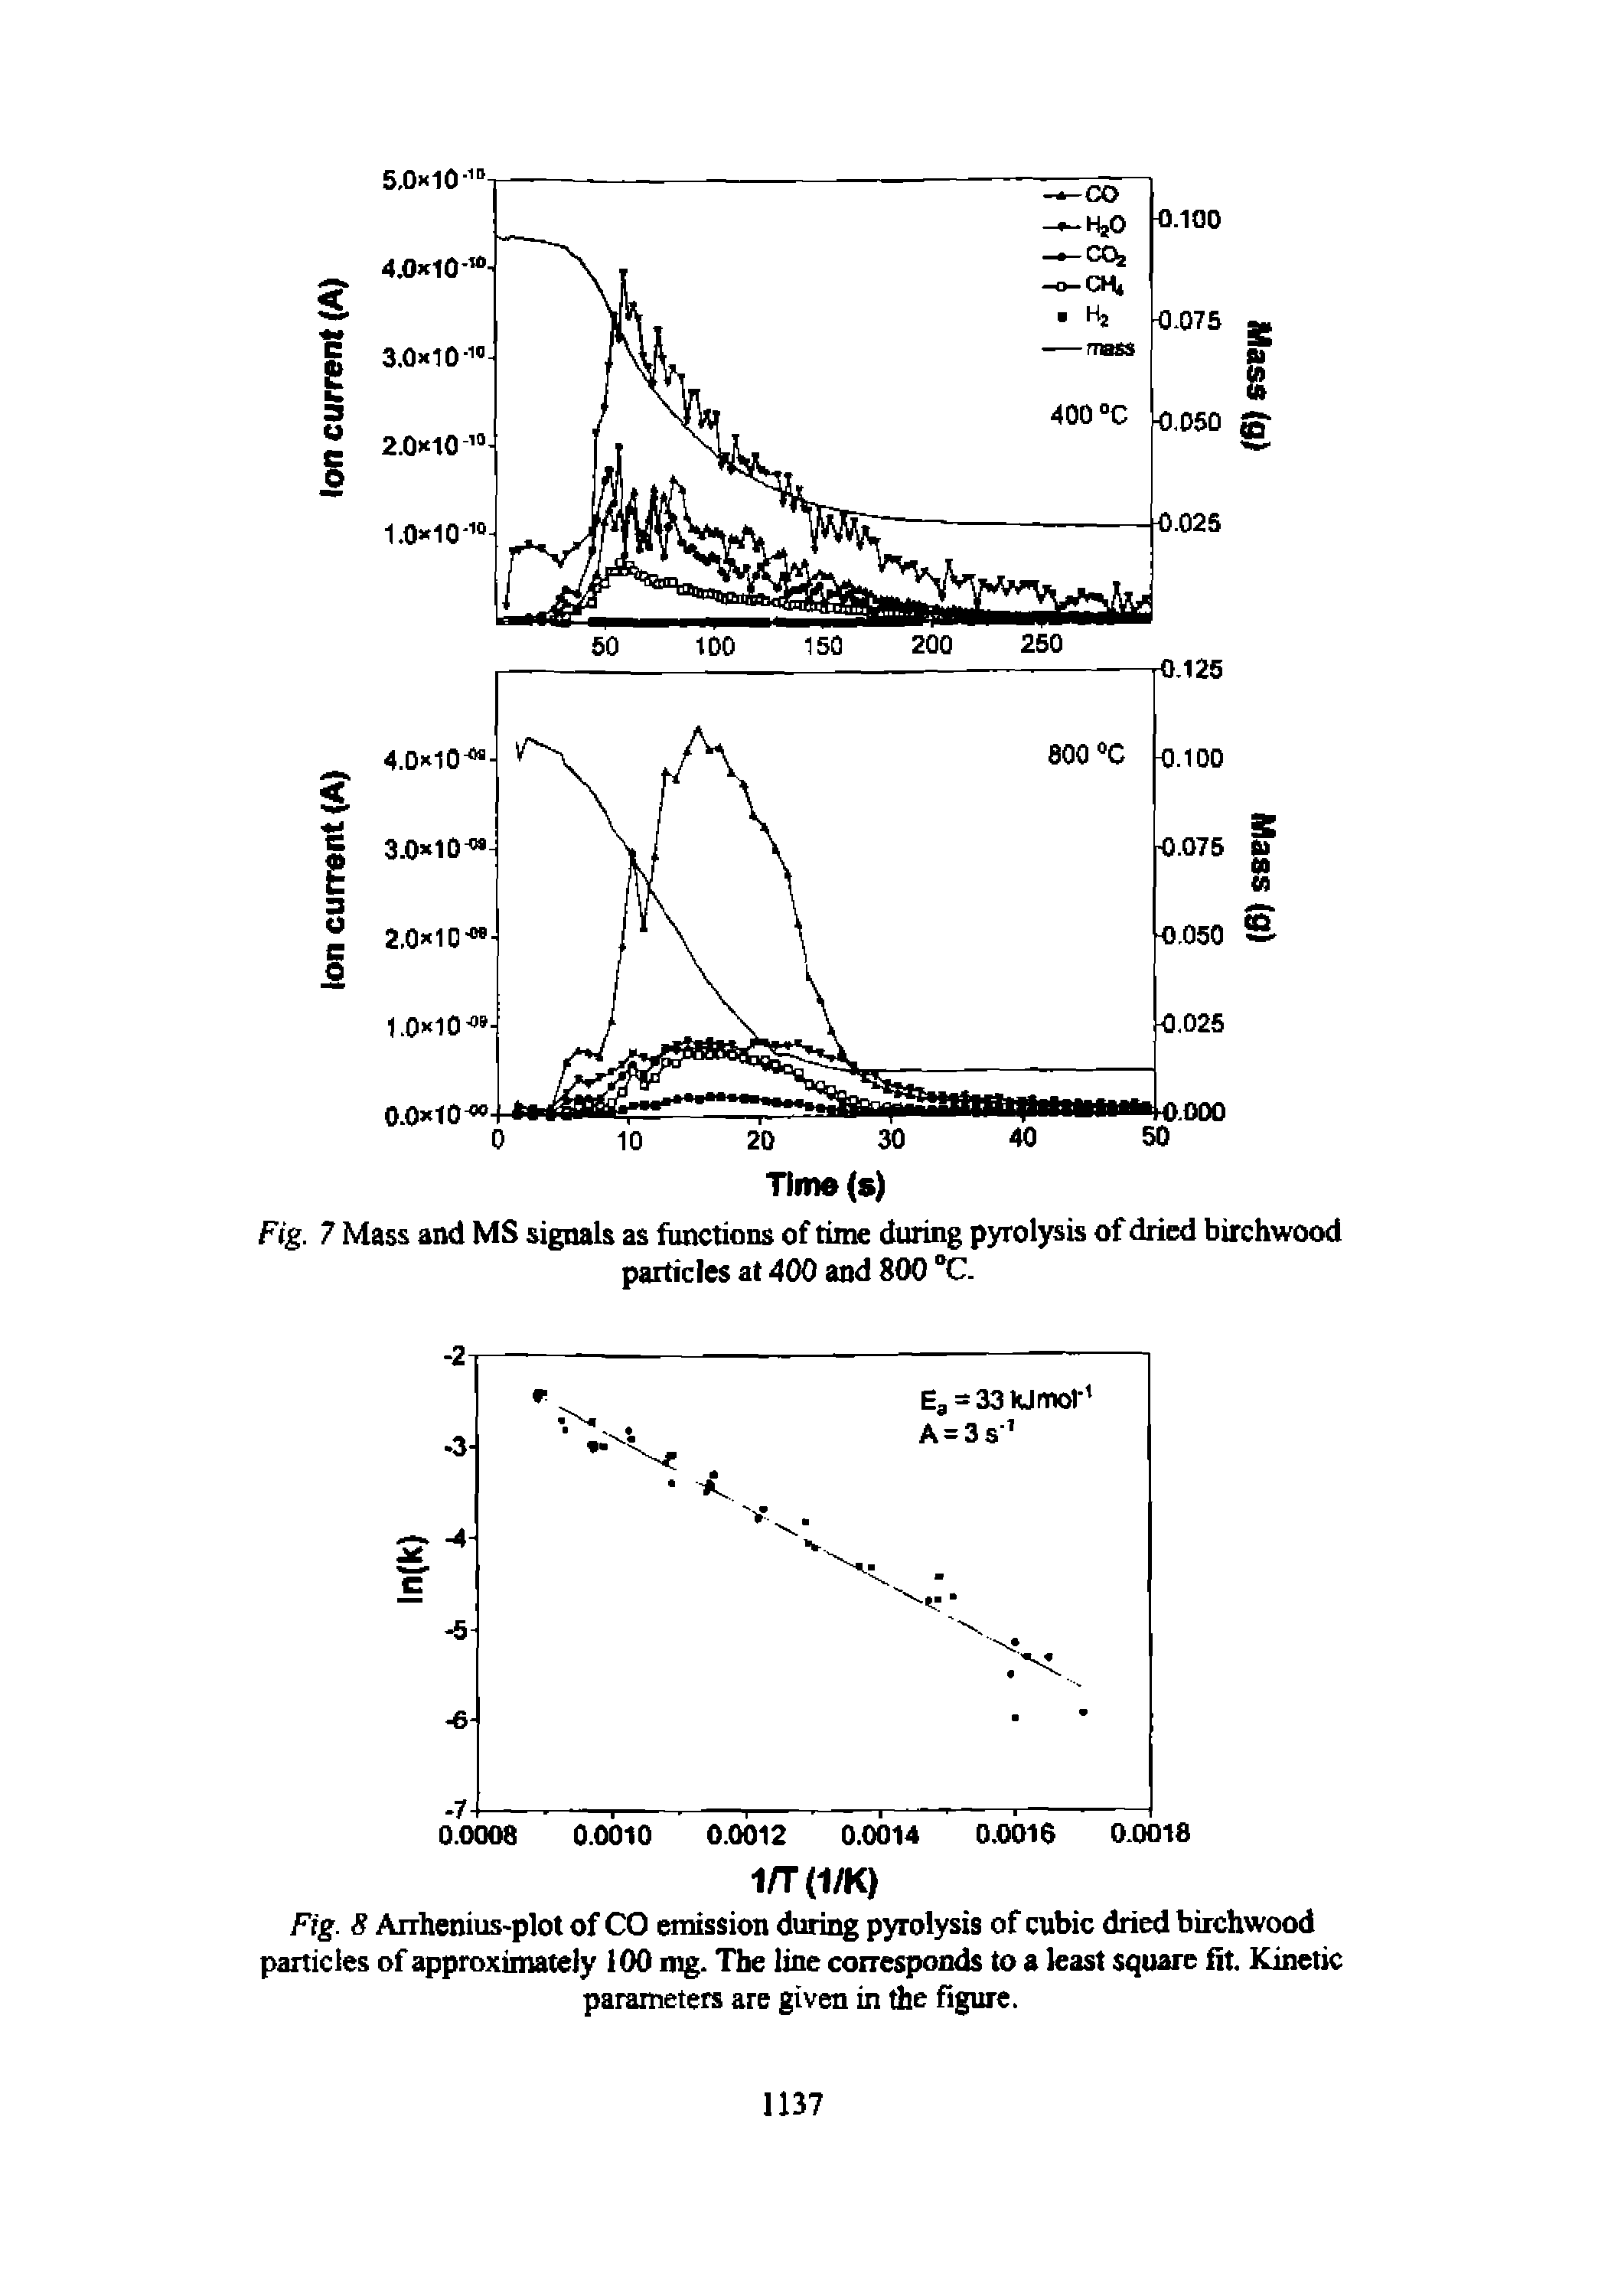 Fig. 8 Arrhenius plot of CO emission during pyrolysis of cubic dried birchwood particles of approximately 100 mg. The line corresponds to a least square fit. Kinetic parameters are given in the figure.